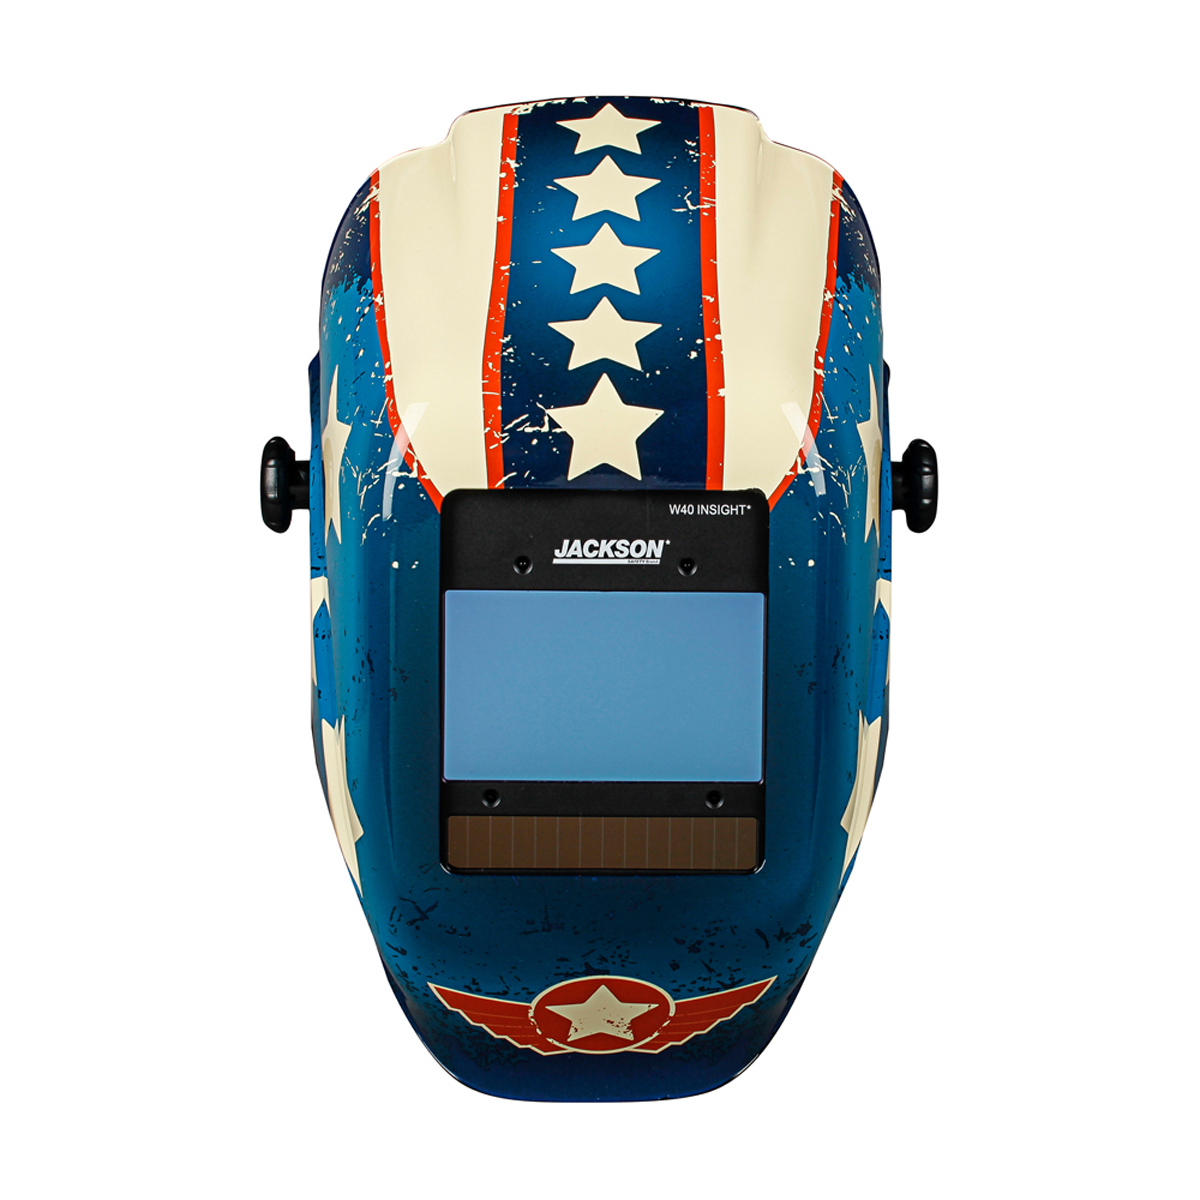 Jackson Safety® HLX-100 Red/White/Blue Welding Helmet With 3.94” X 2.36” Variable Shades 9 - 13 Auto Darkening Lens, Insight® An